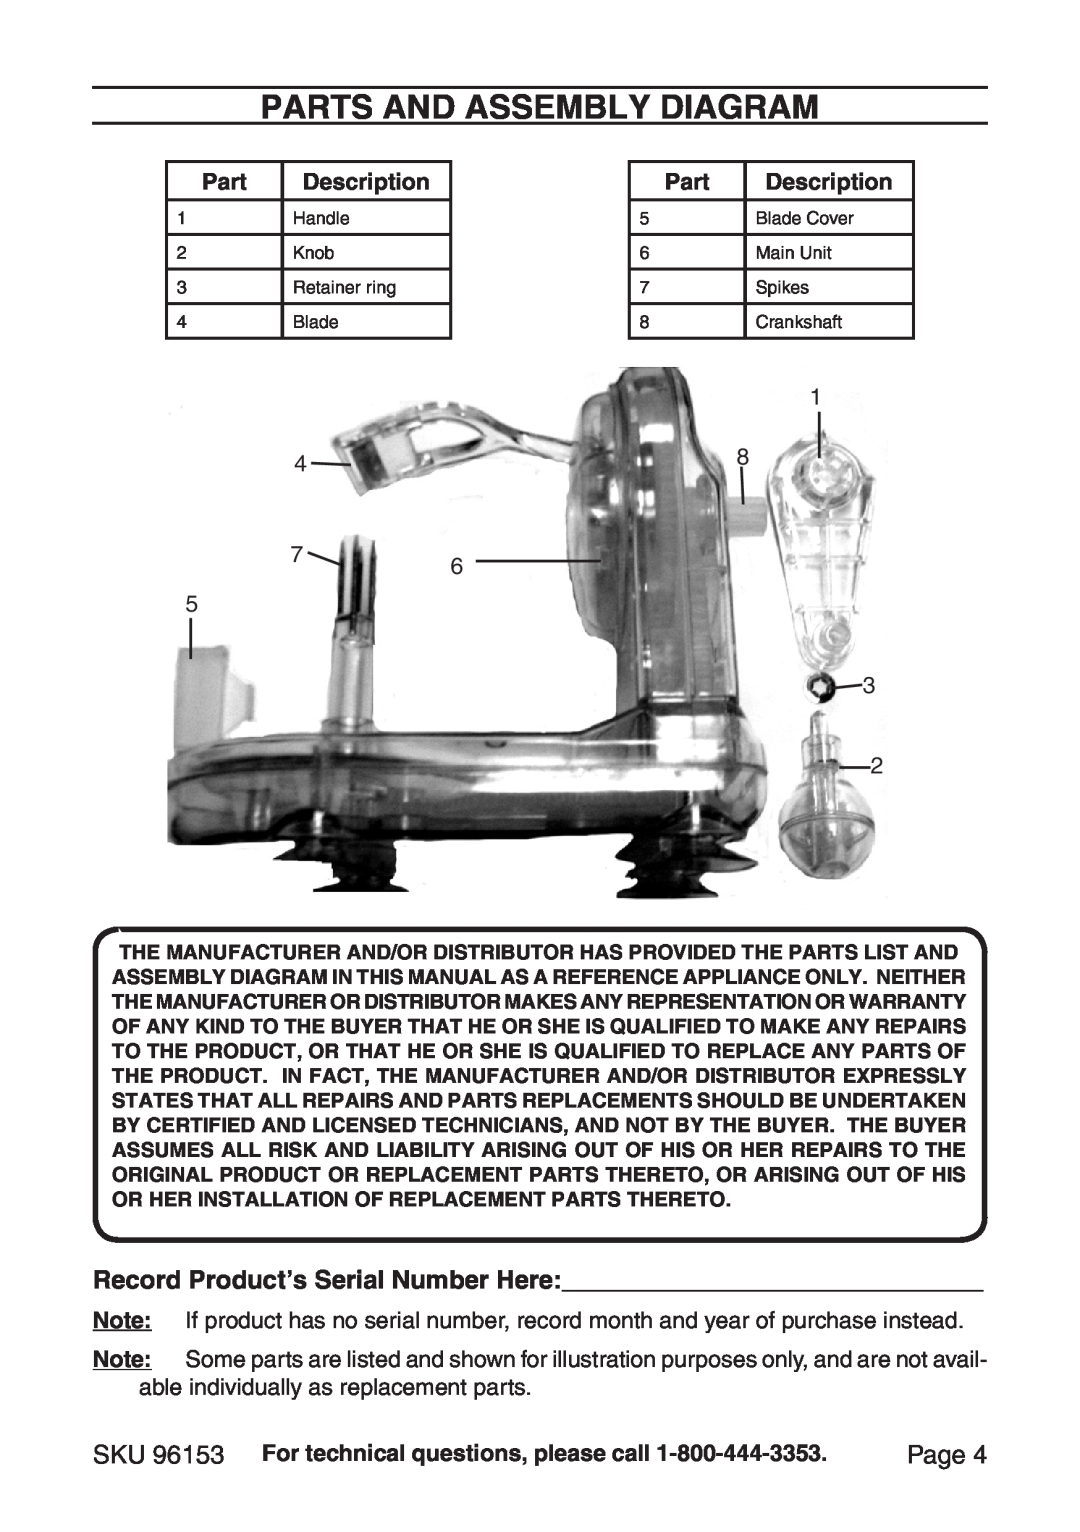 Harbor Freight Tools 96153 manual Parts and assembly diagram, Record Product’s Serial Number Here, Page 